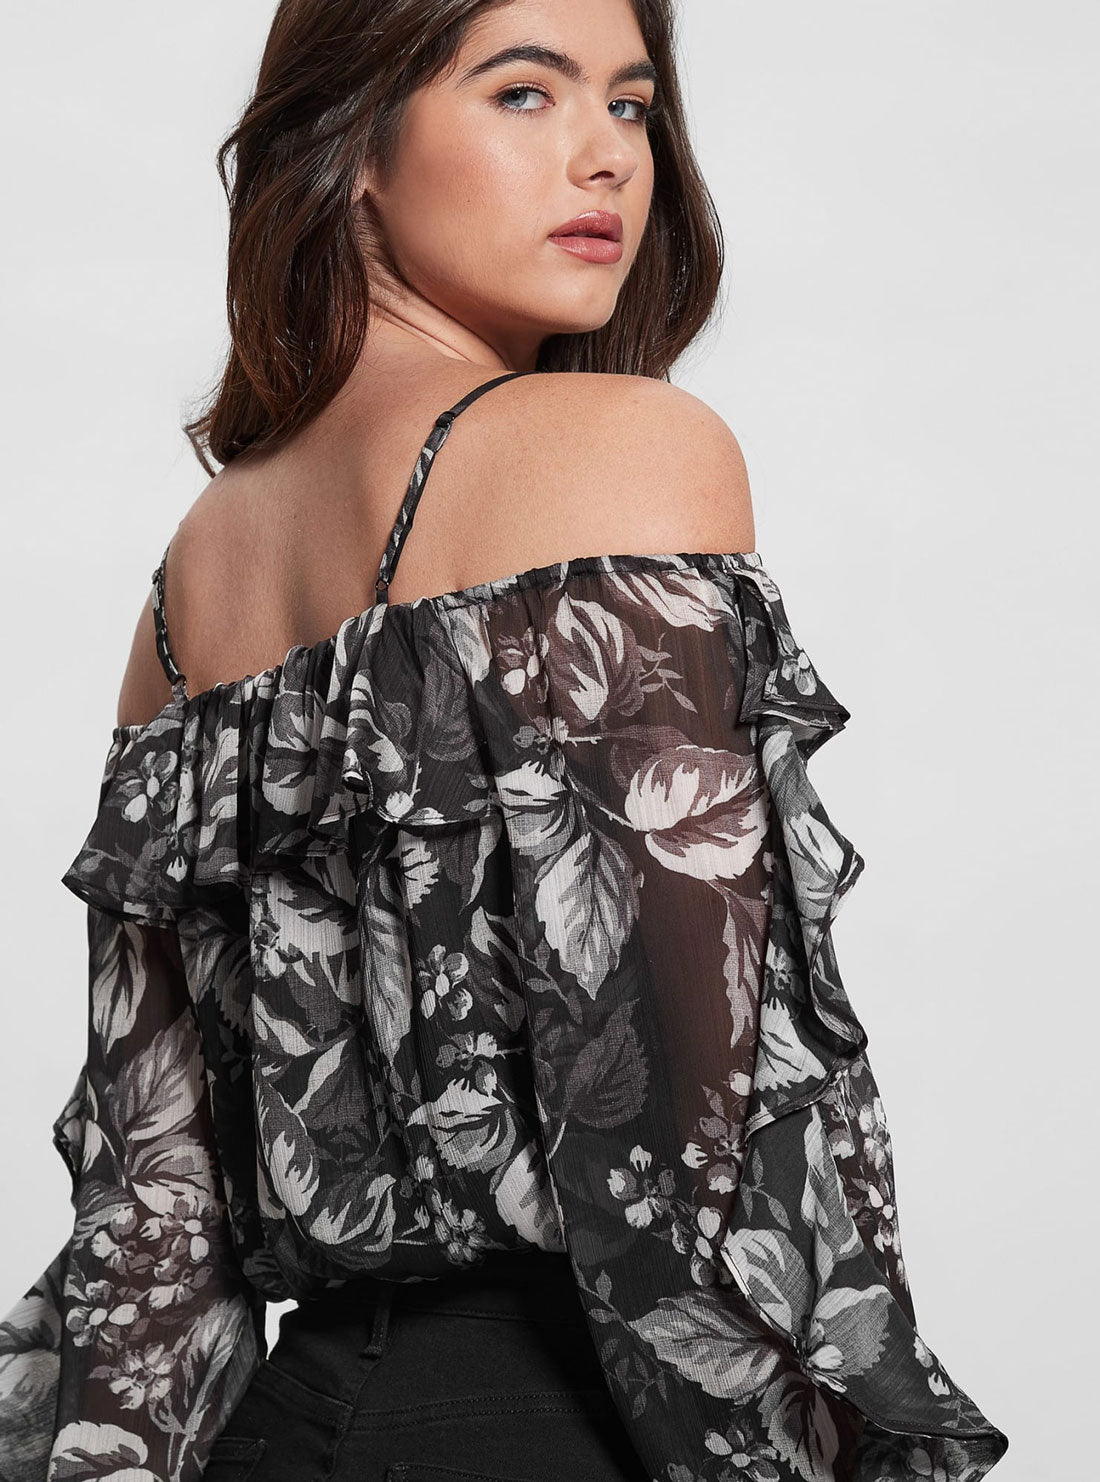 Black Floral Iggy Top | GUESS Women's Apparel | back detail view